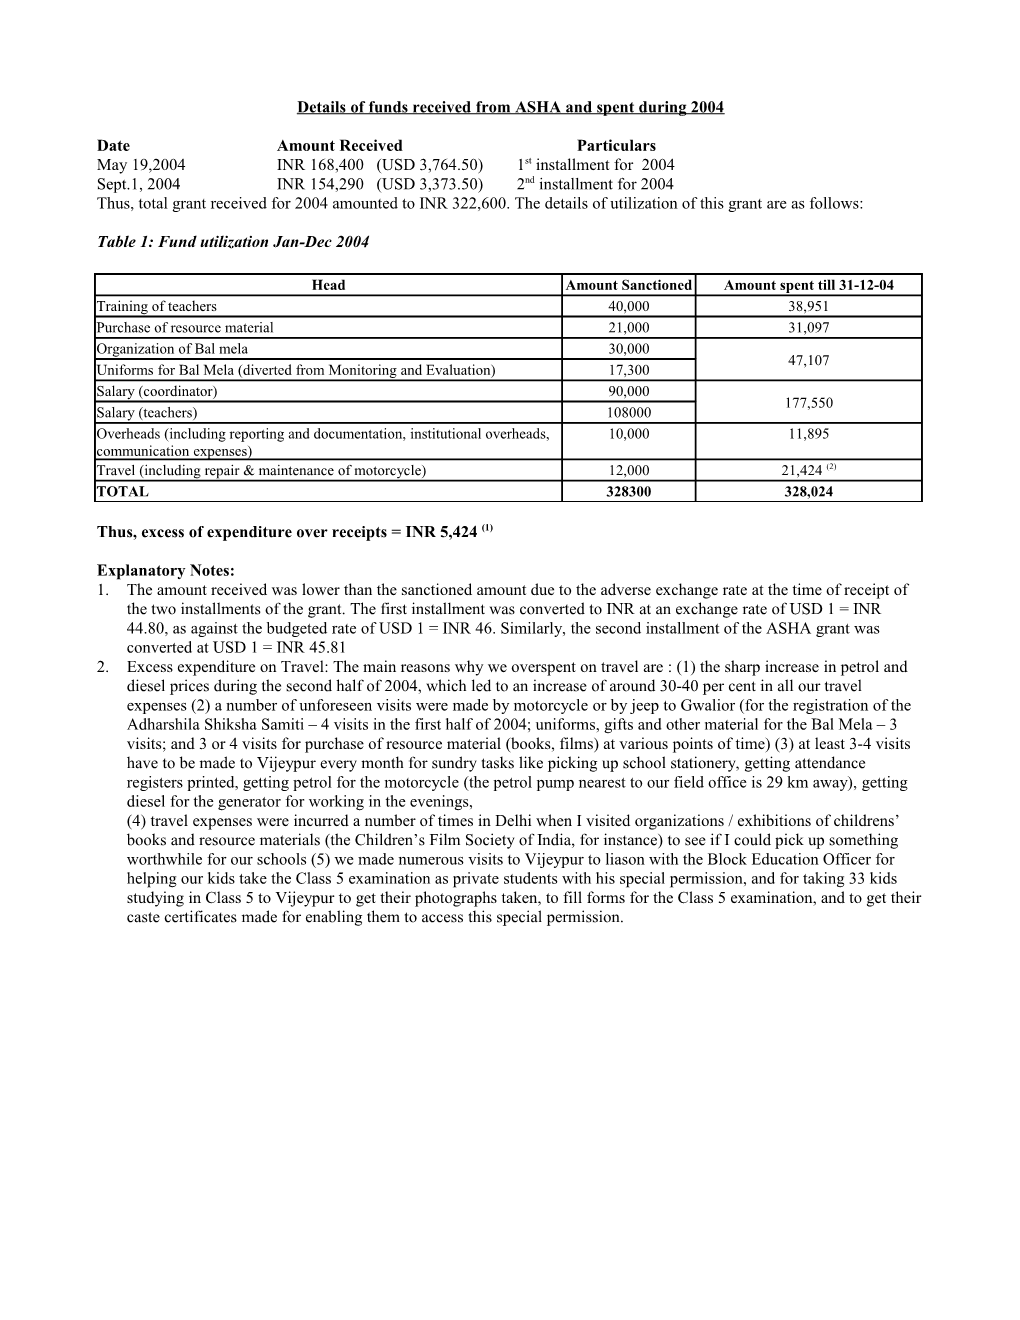 Details of Funds Received from ASHA and Spent During 2004